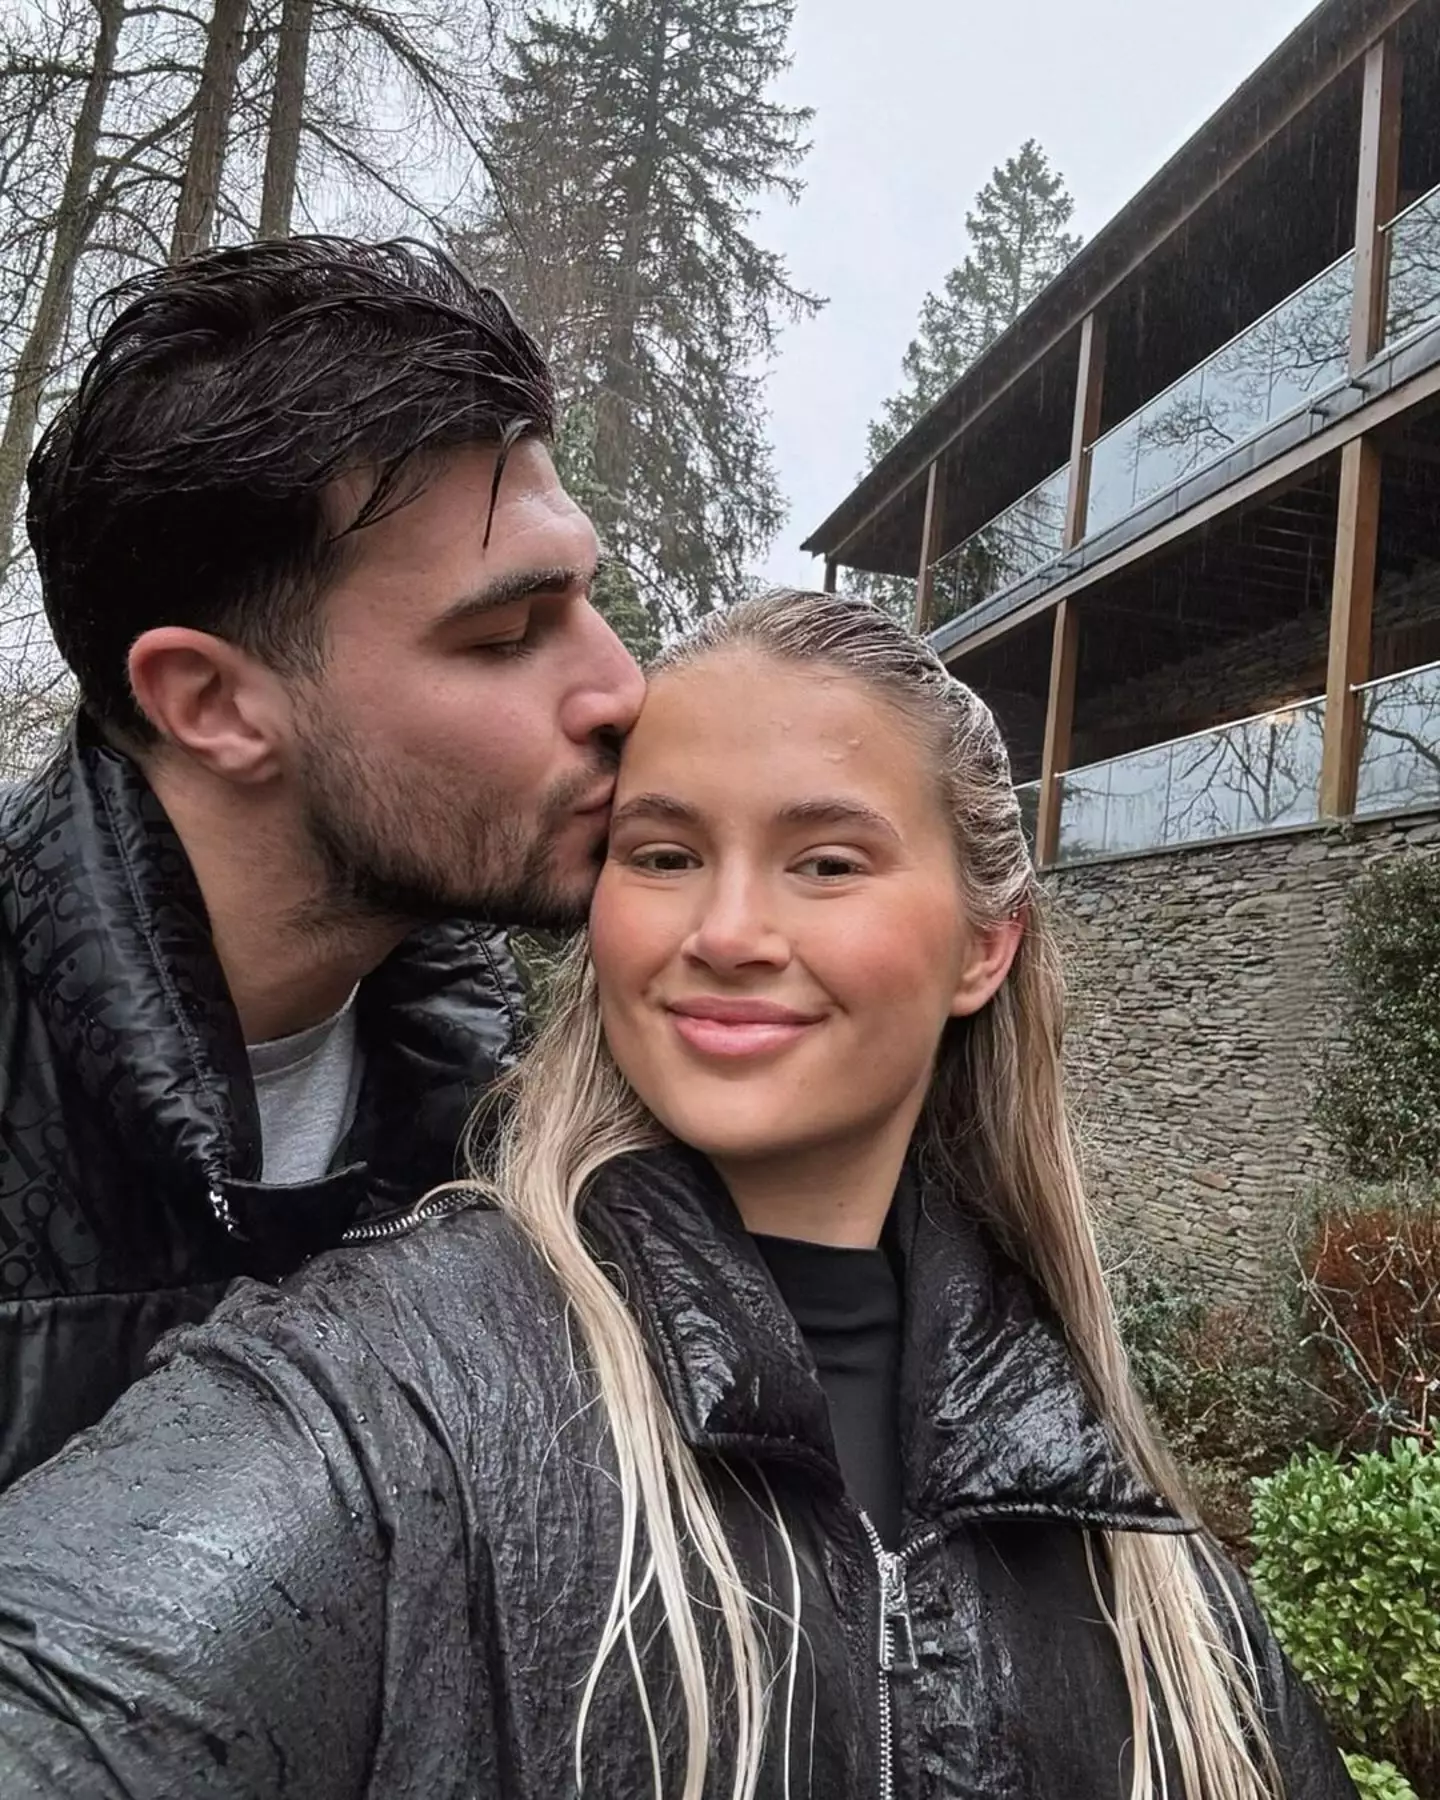 Tommy Fury and Molly-Mae are soon set to tie the knot.